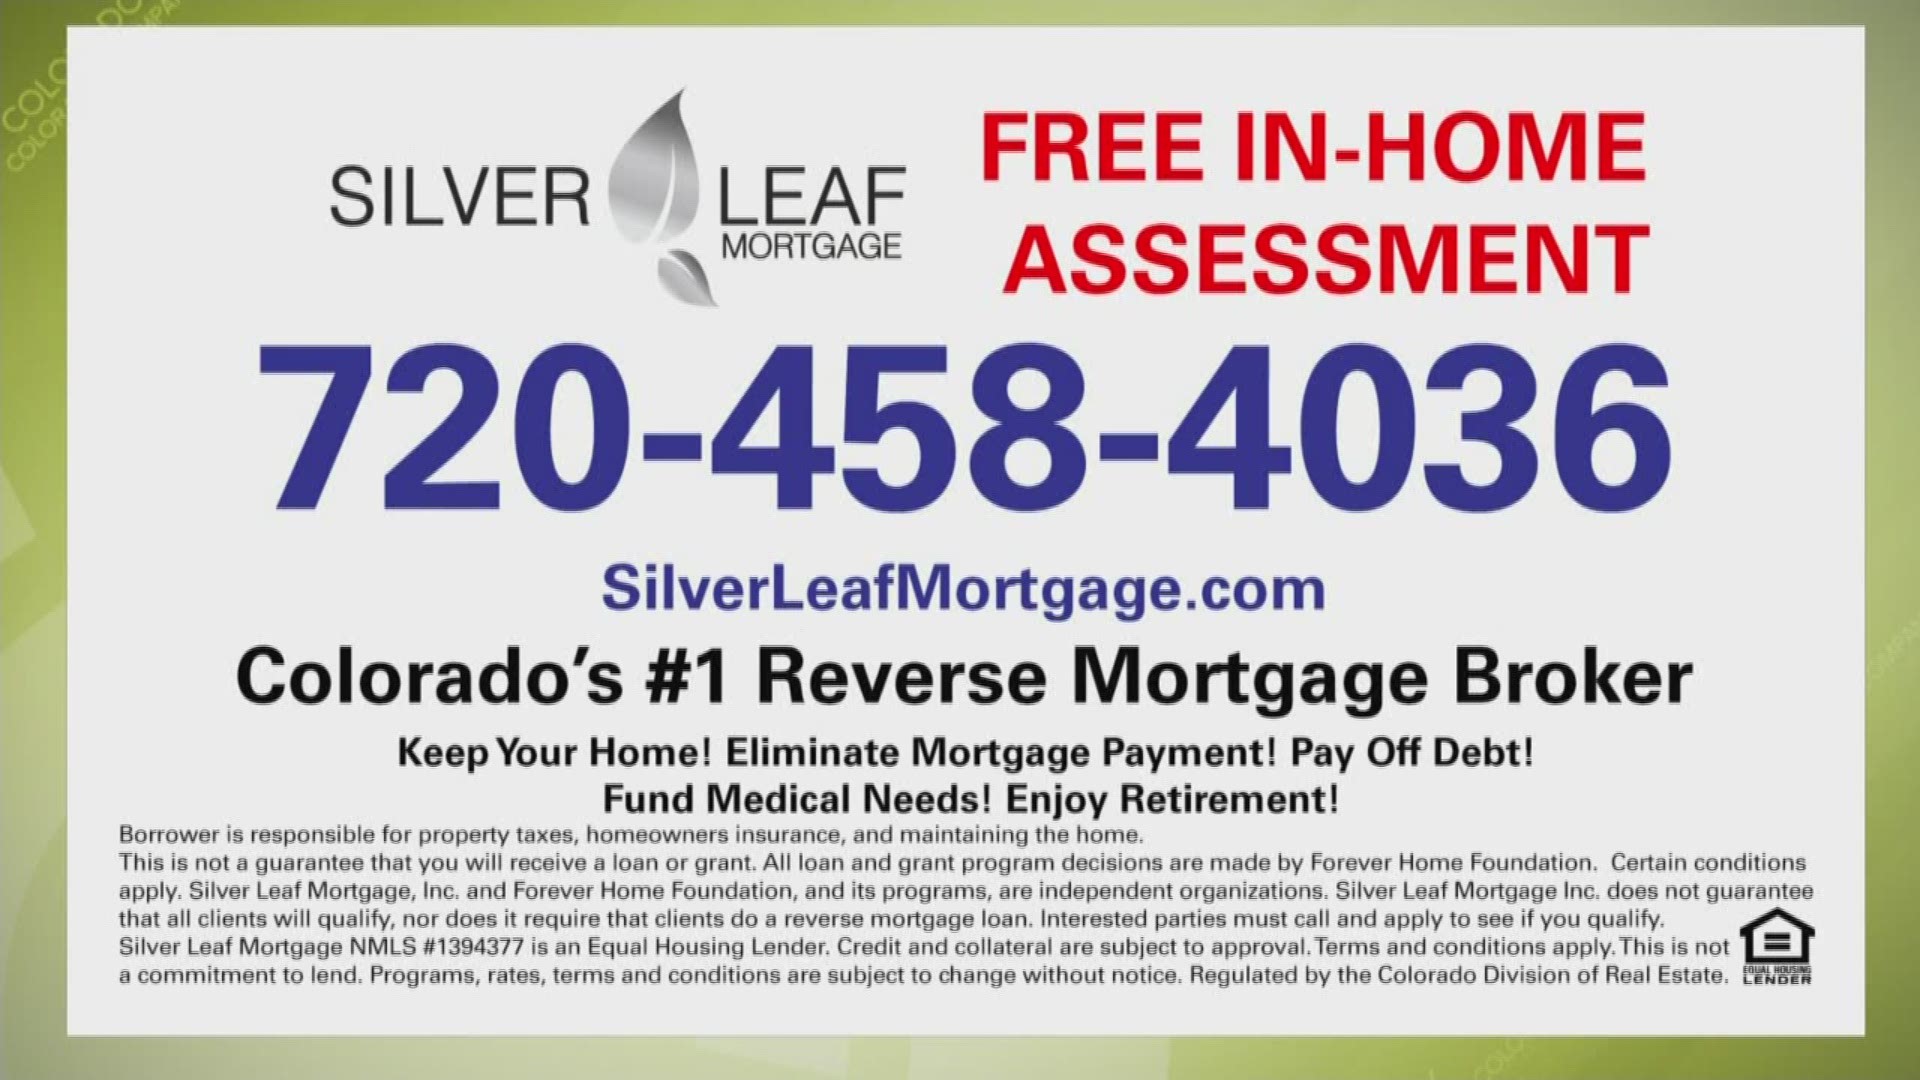 Silver Leaf Mortgage - February 4, 2020
Call 720.458.4036 or visit SilverLeafMortgage.com to find out if a reverse mortgage is right for you. They're the number one